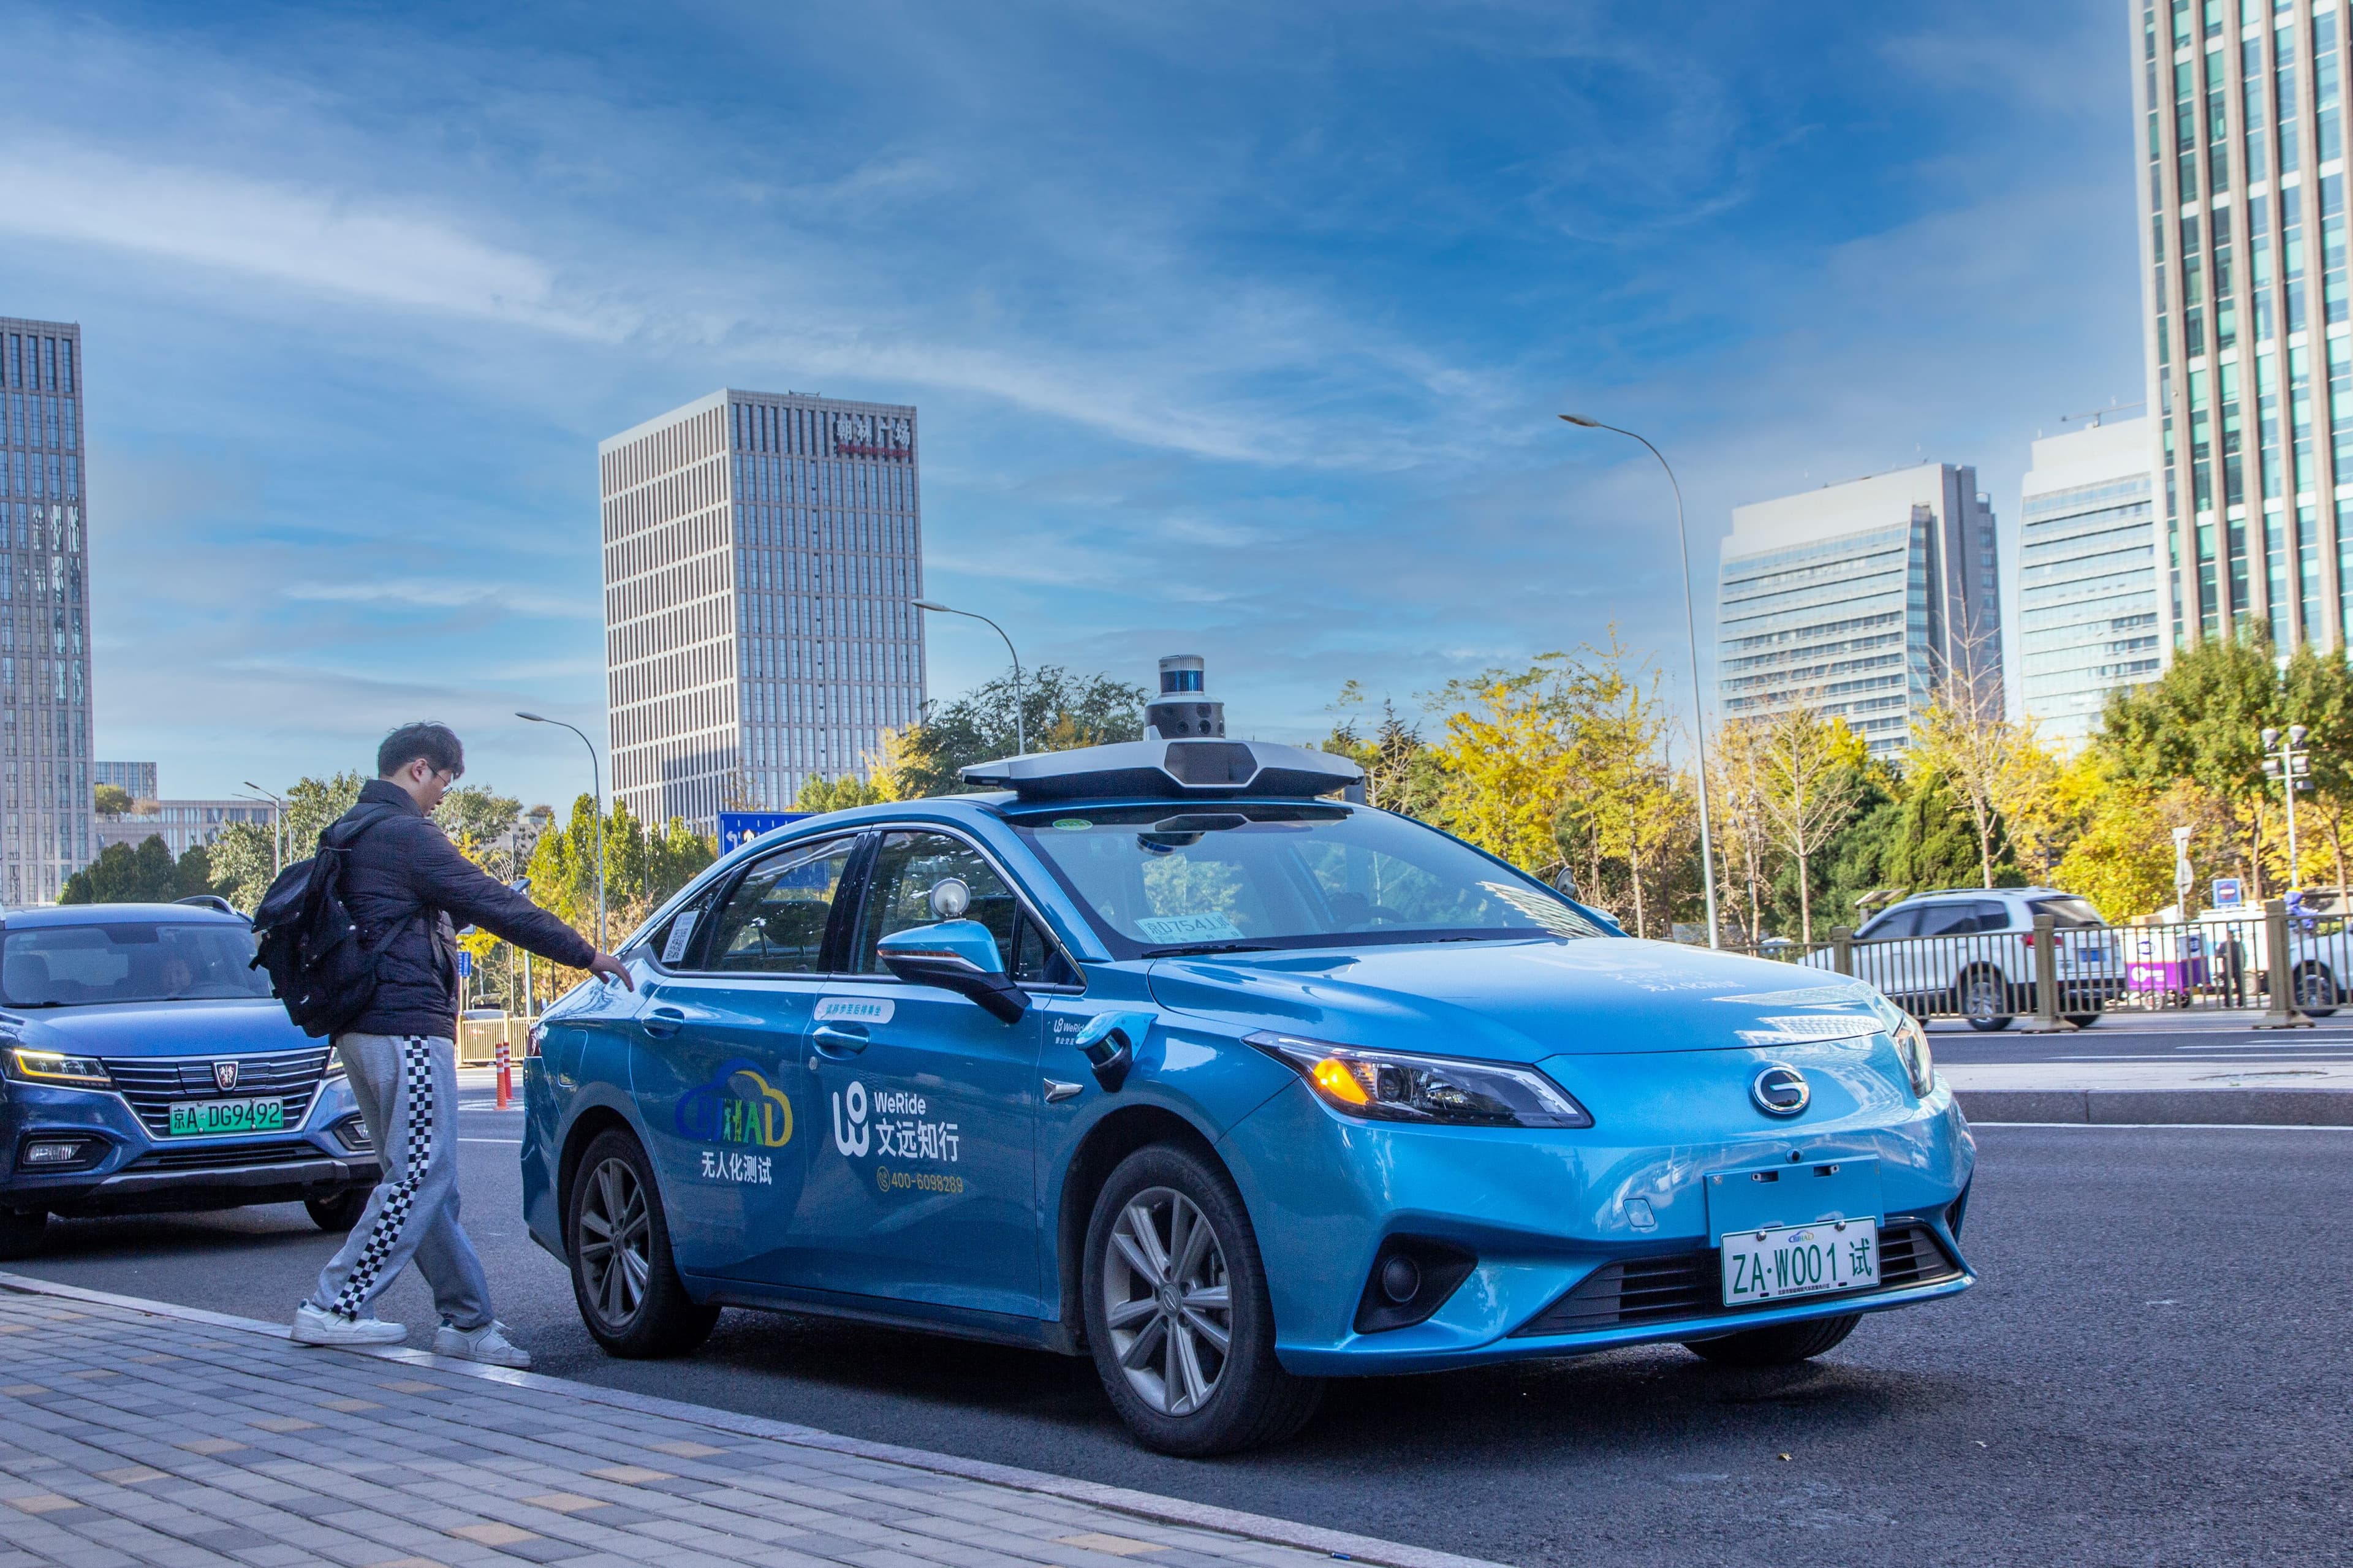 WeRide received approval to launch a paid service of fully driverless Robotaxis in Beijing